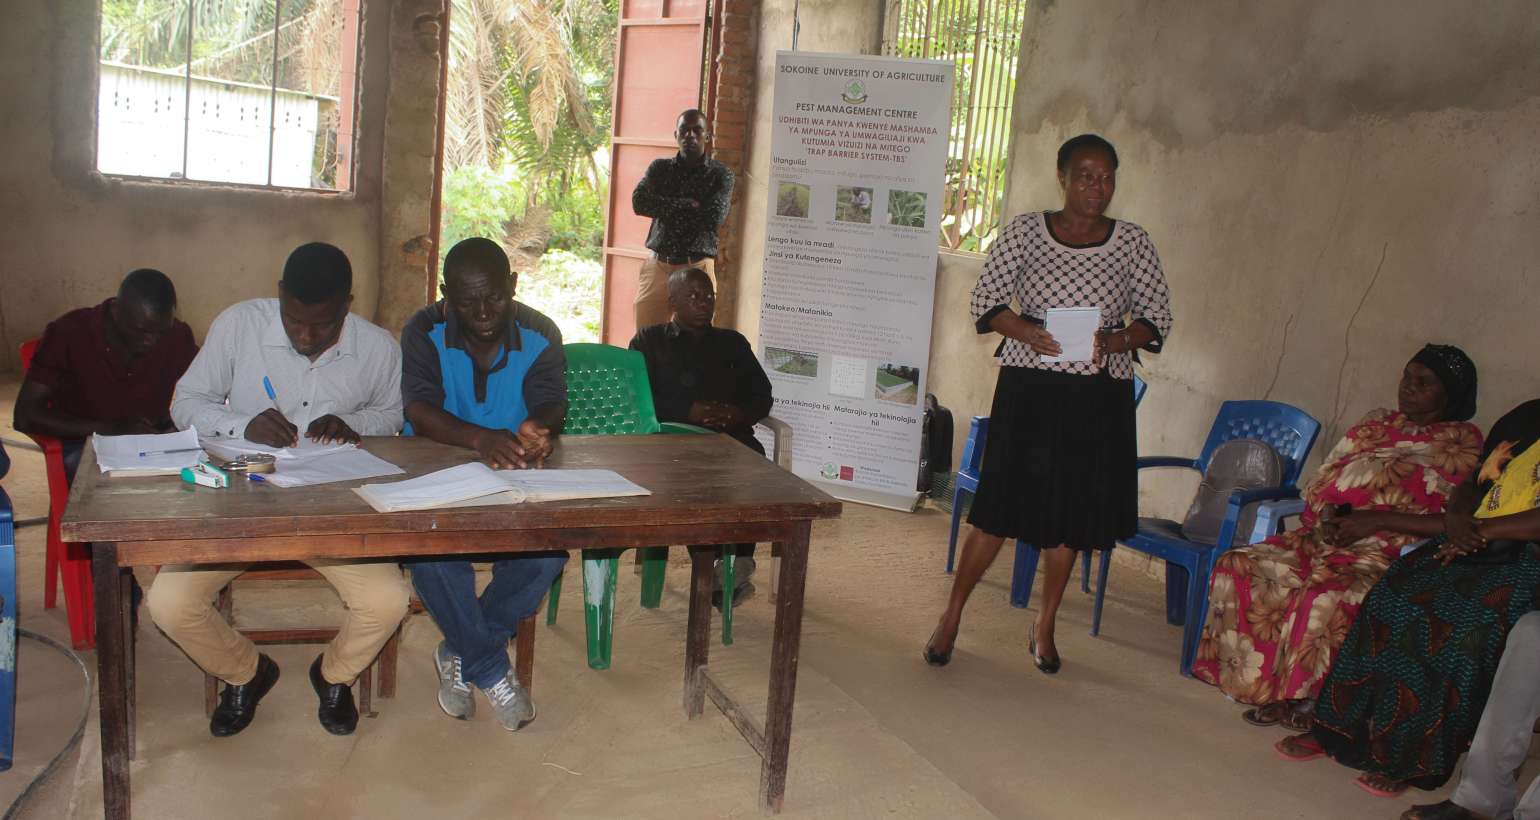 Introducing Non-chemical control of rodents through trap barrier systems (TBS) to Farmers in Mkula village, Kilombero Distirct, Morogoro Region, Tanzania